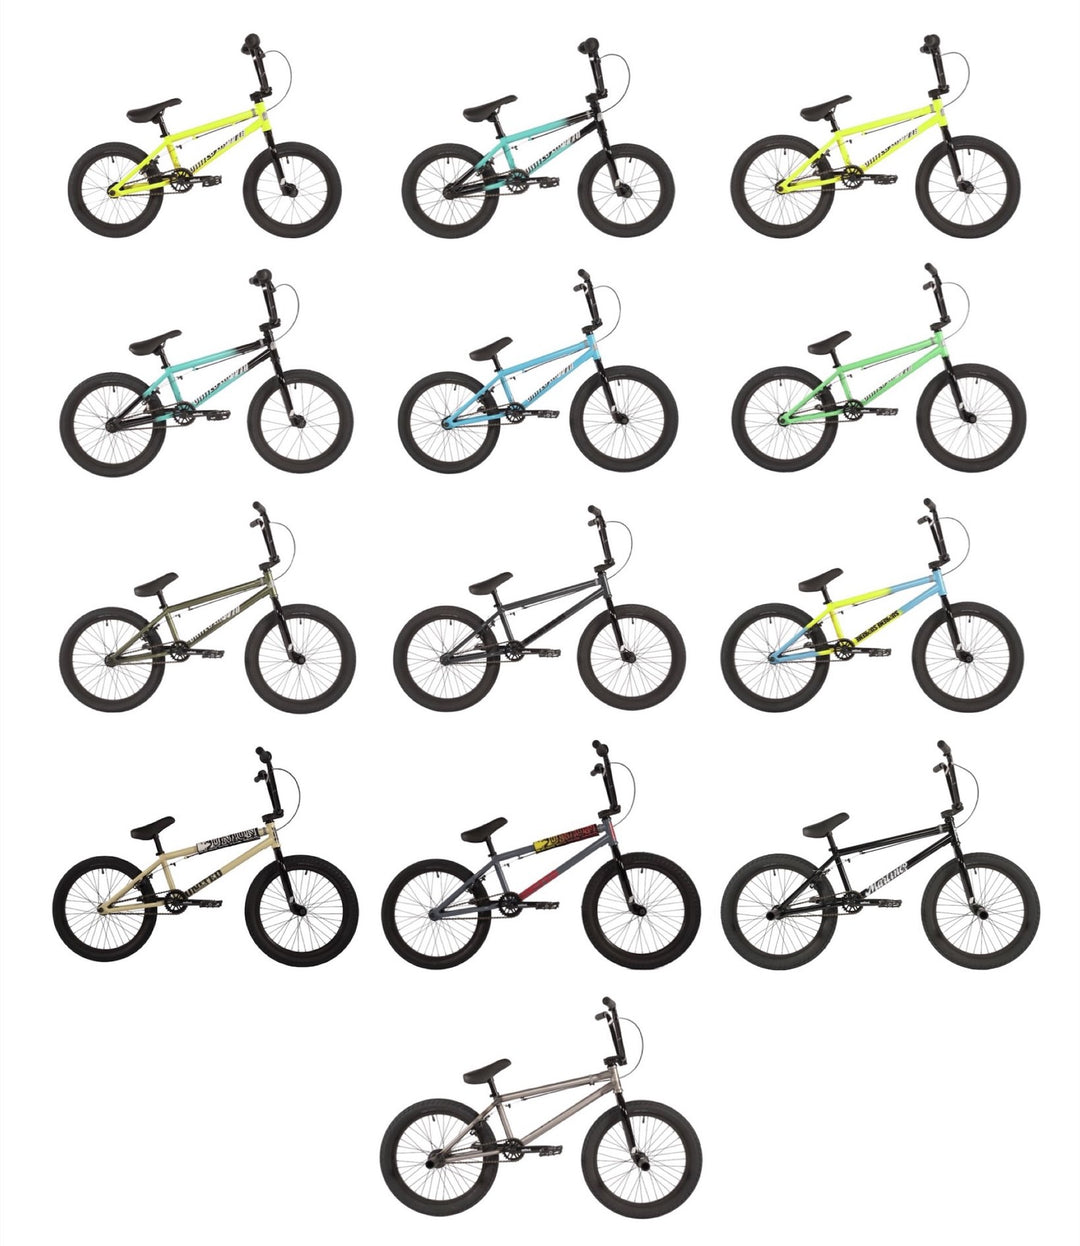 CHECK OUT OUR COMPLETE BIKES NOW